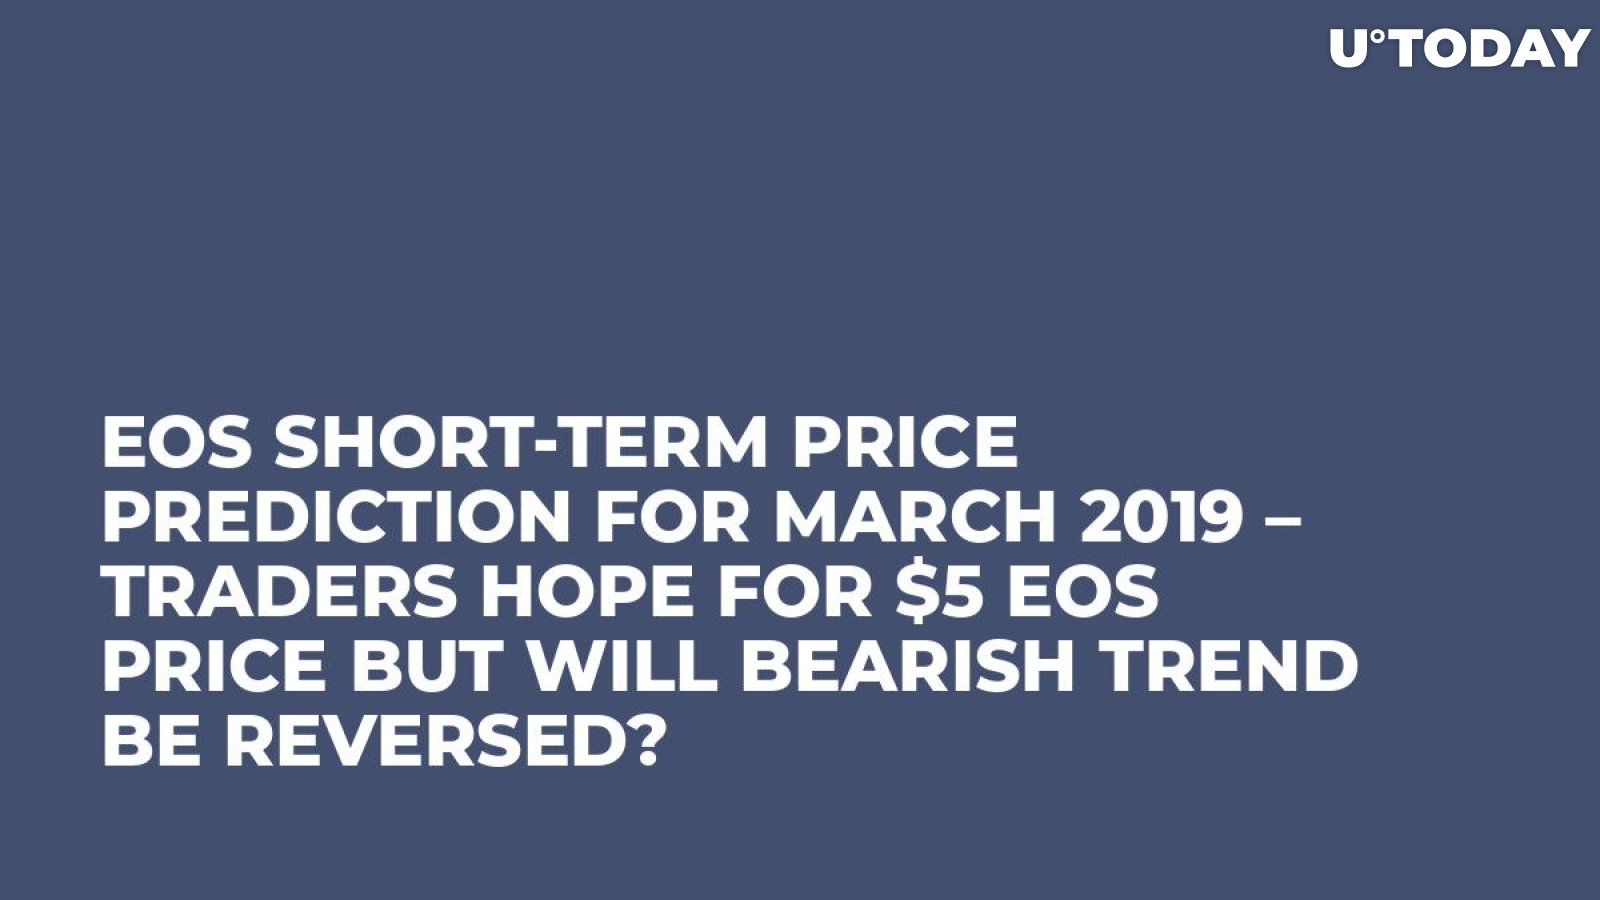 EOS Short-Term Price Prediction for March 2019 – Traders Hope for $5 EOS Price But Will Bearish Trend Be Reversed? 